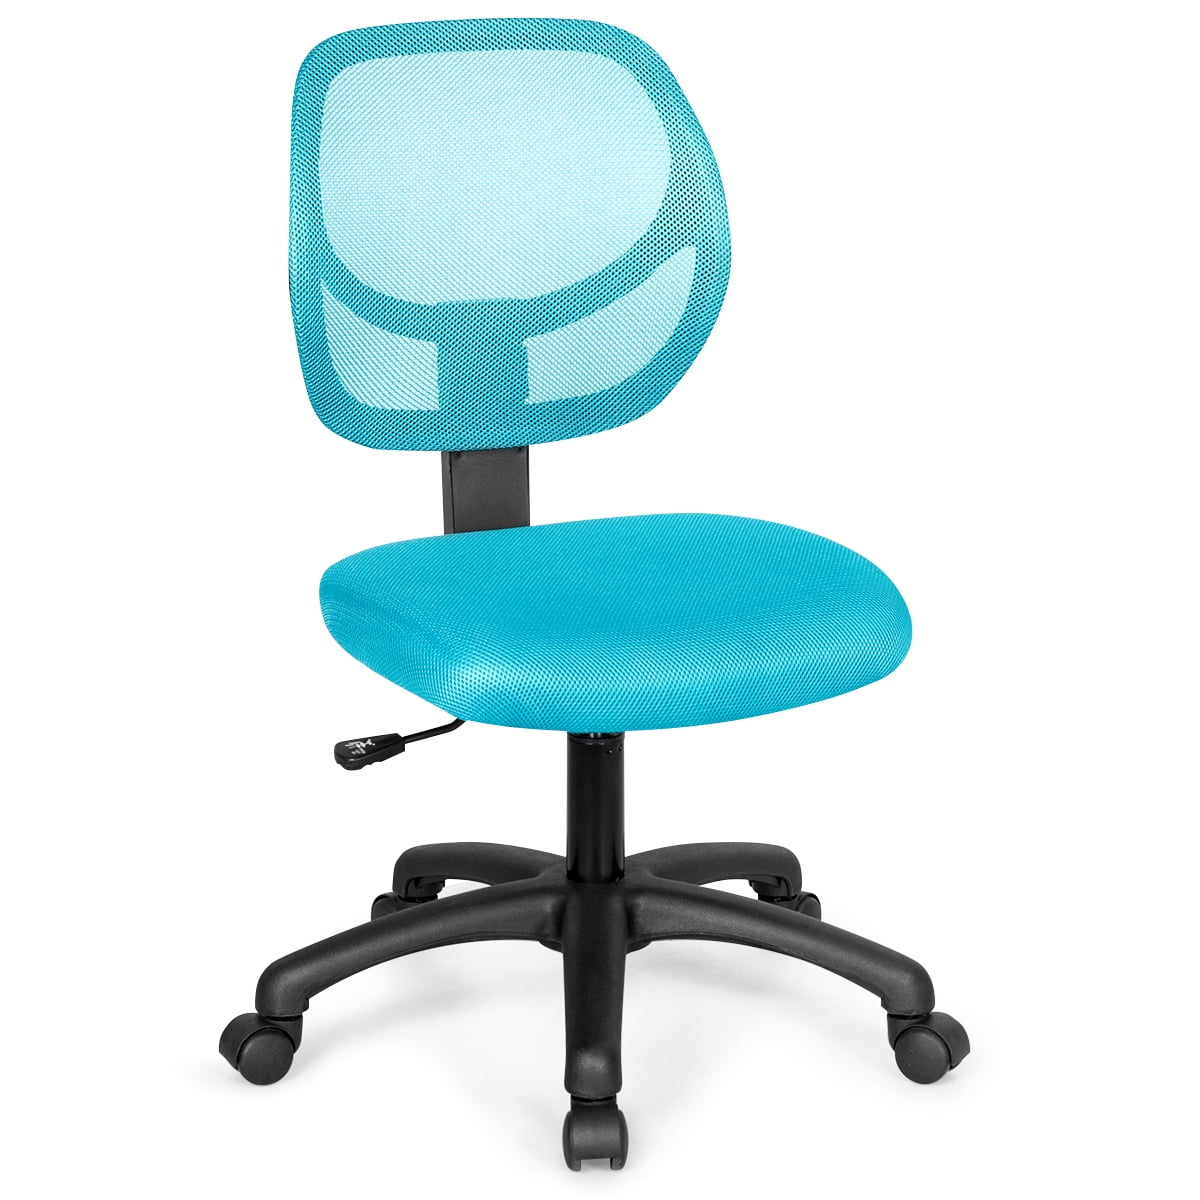 Costway Mesh Office Chair Low-Back Armless Computer Desk ...